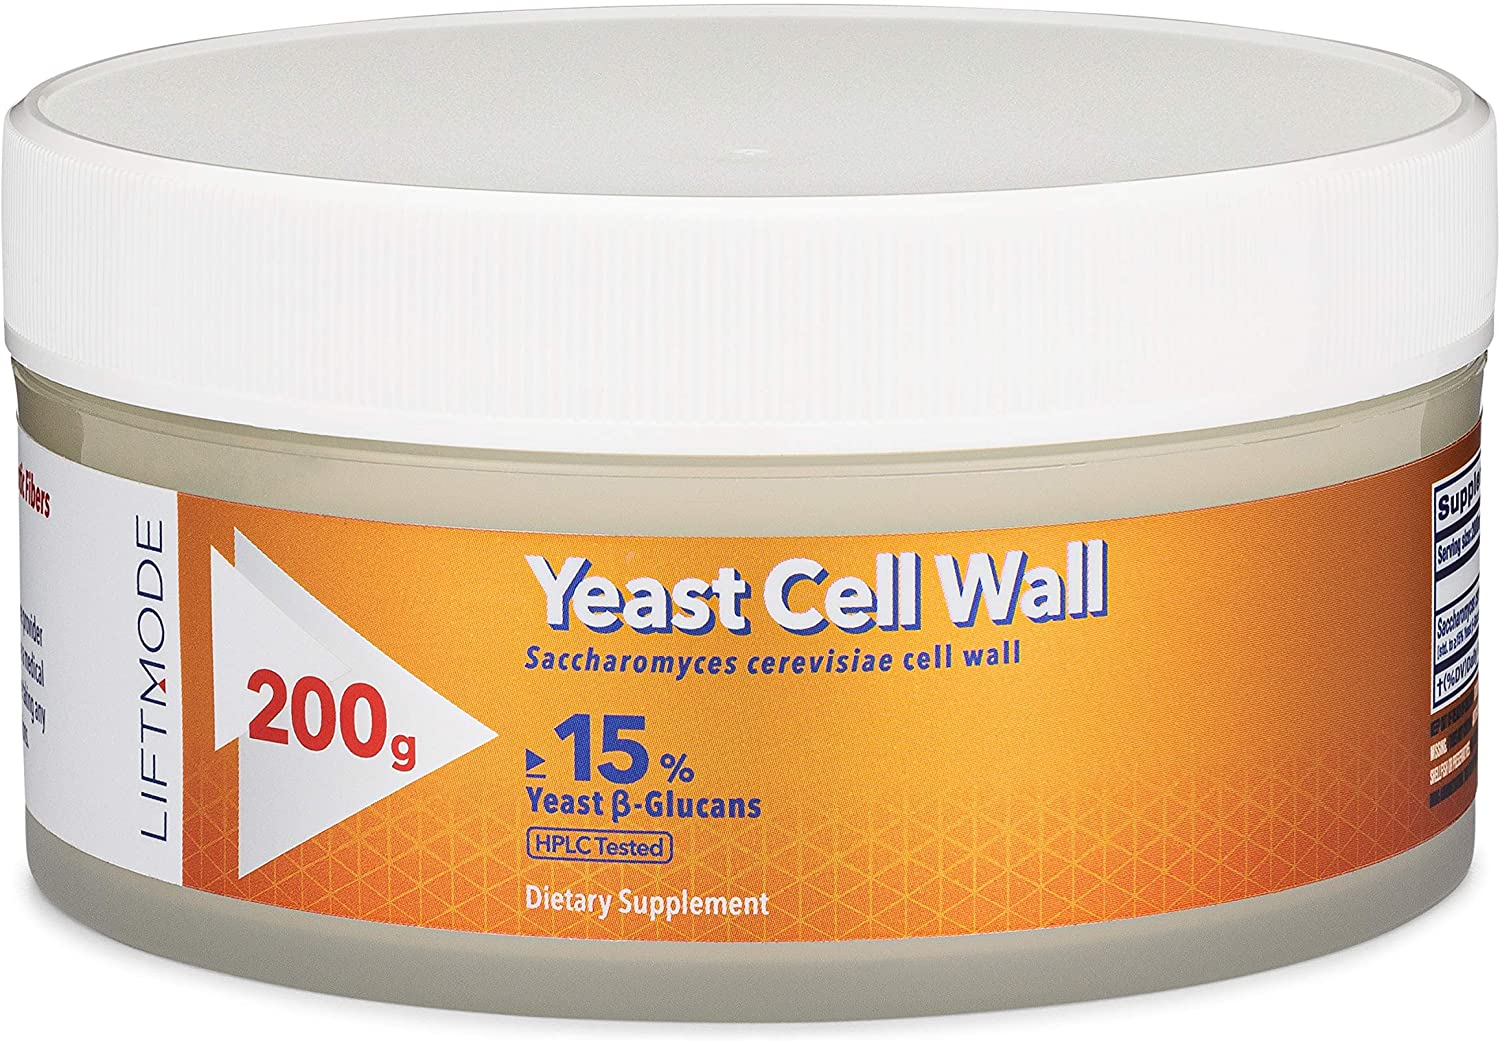 Liftmode Yeast Cell Wall - 200 g-2